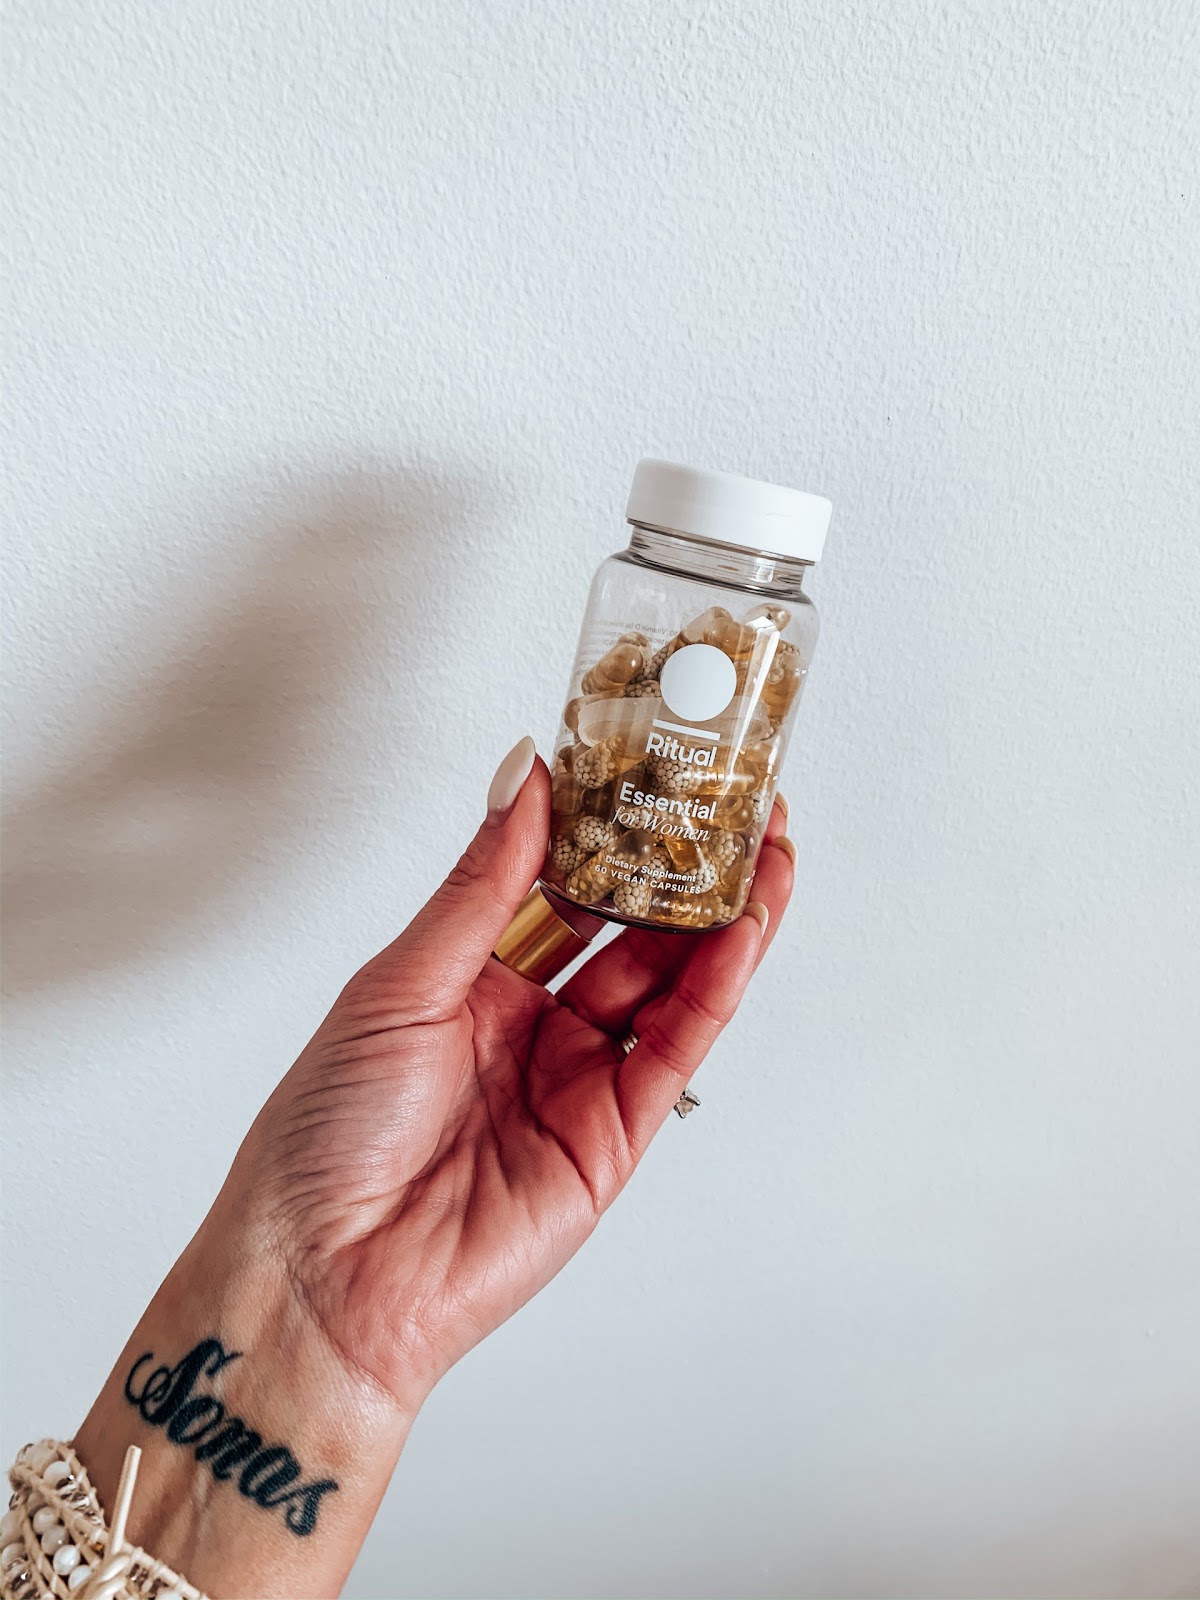 The Multivitamin from Ritual You Should be Taking | Style Blogger Lauren Meyer shares The Multivitamin from Ritual You Should be Taking